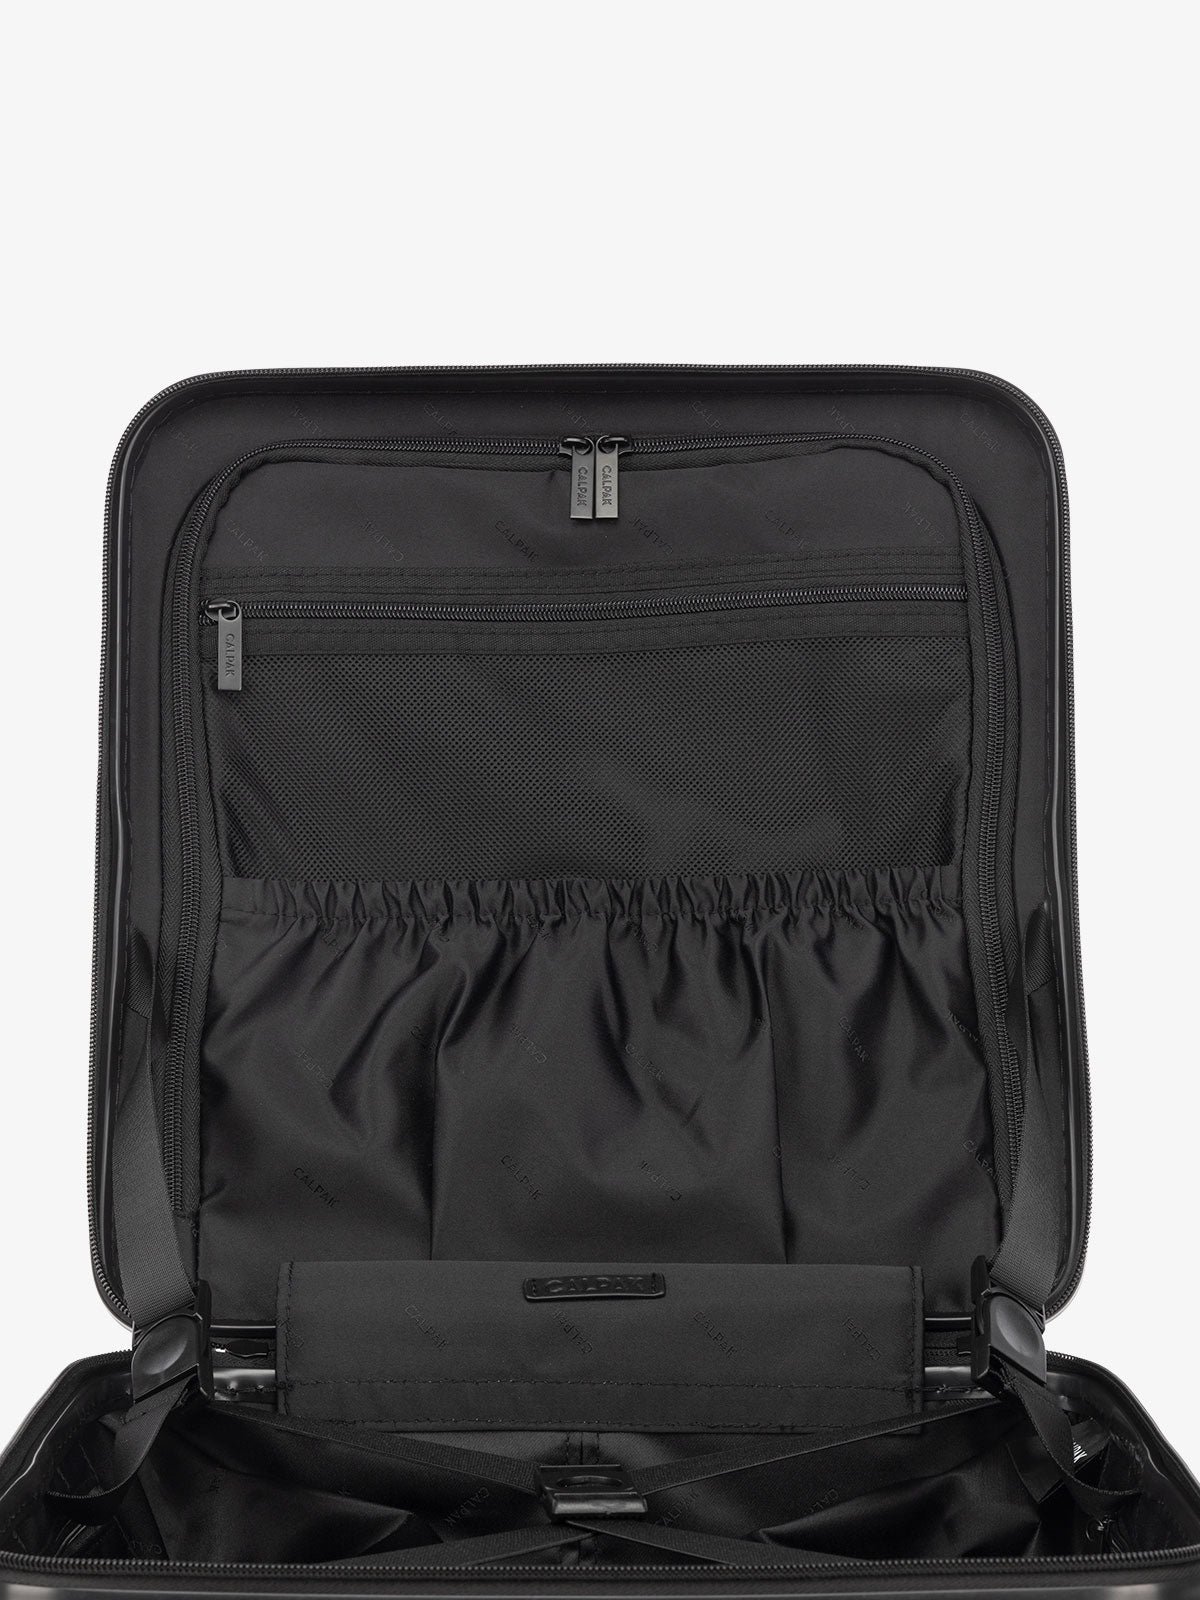 CALPAK TRNK small carry on luggage with divider and multiple pockets in black